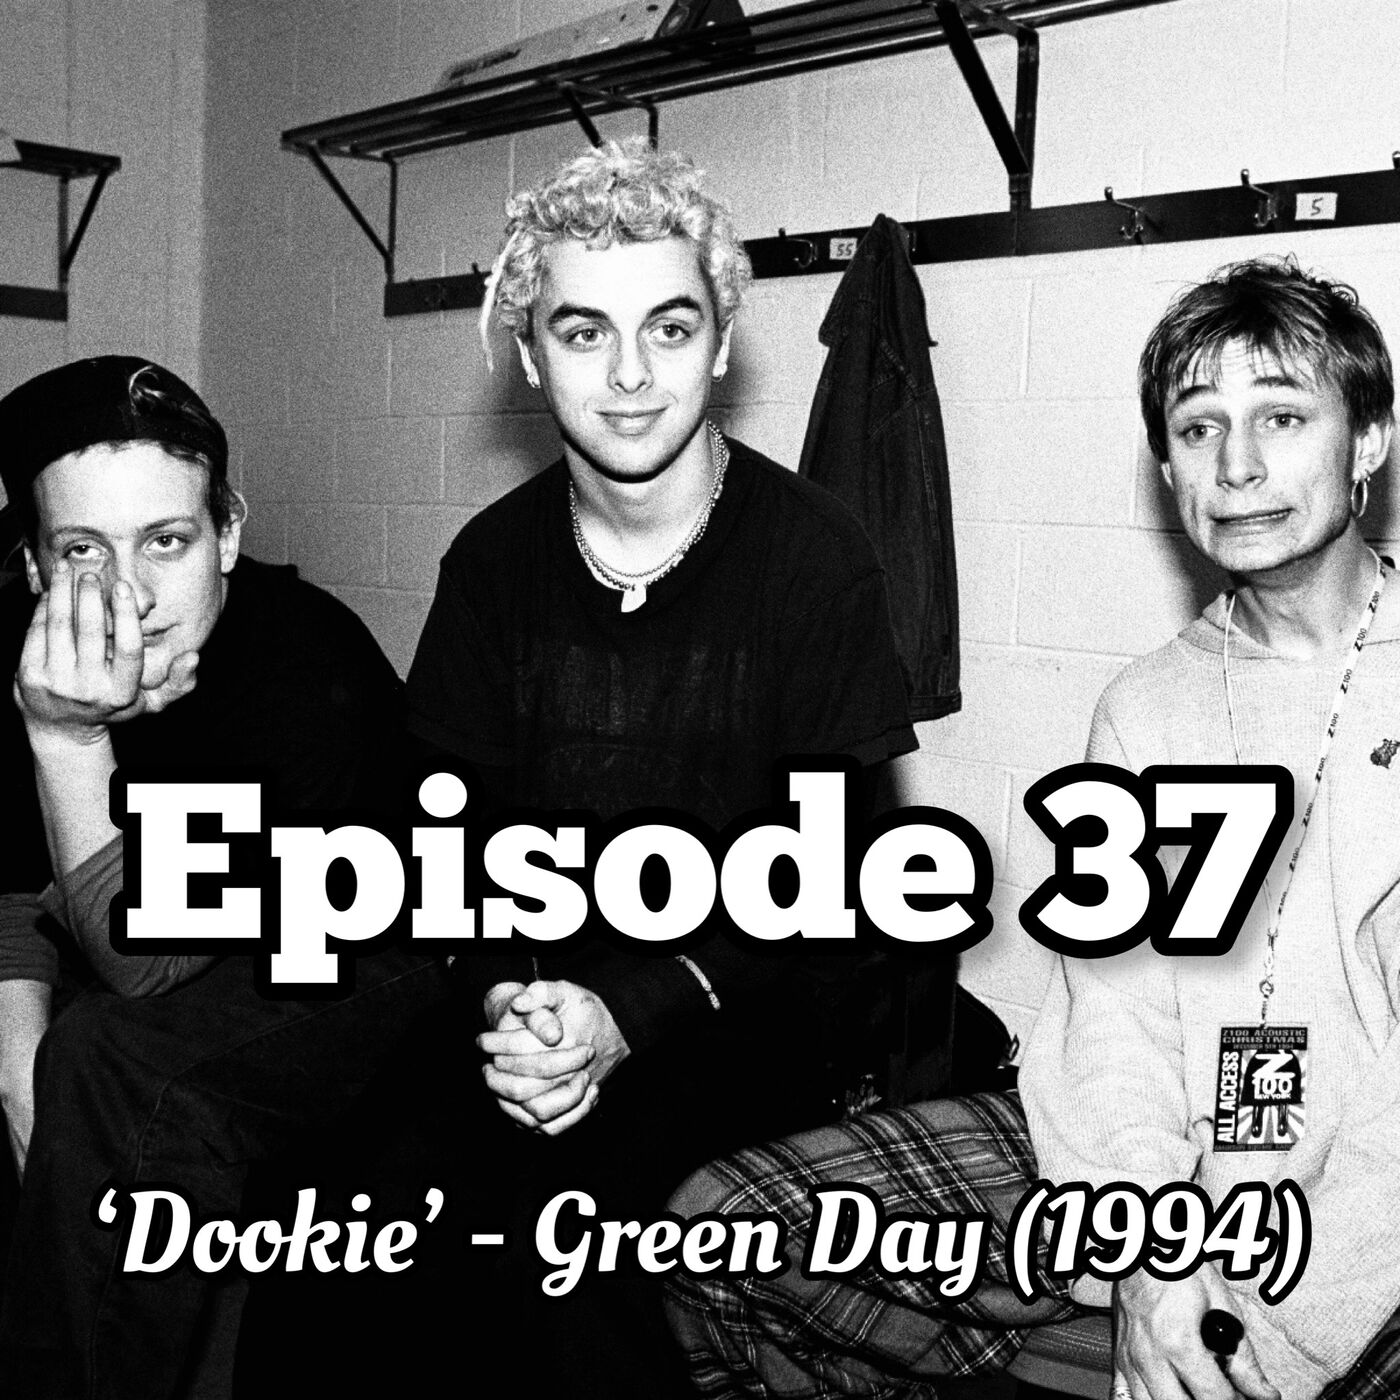 37. ’Dookie’ - Green Day (1994)